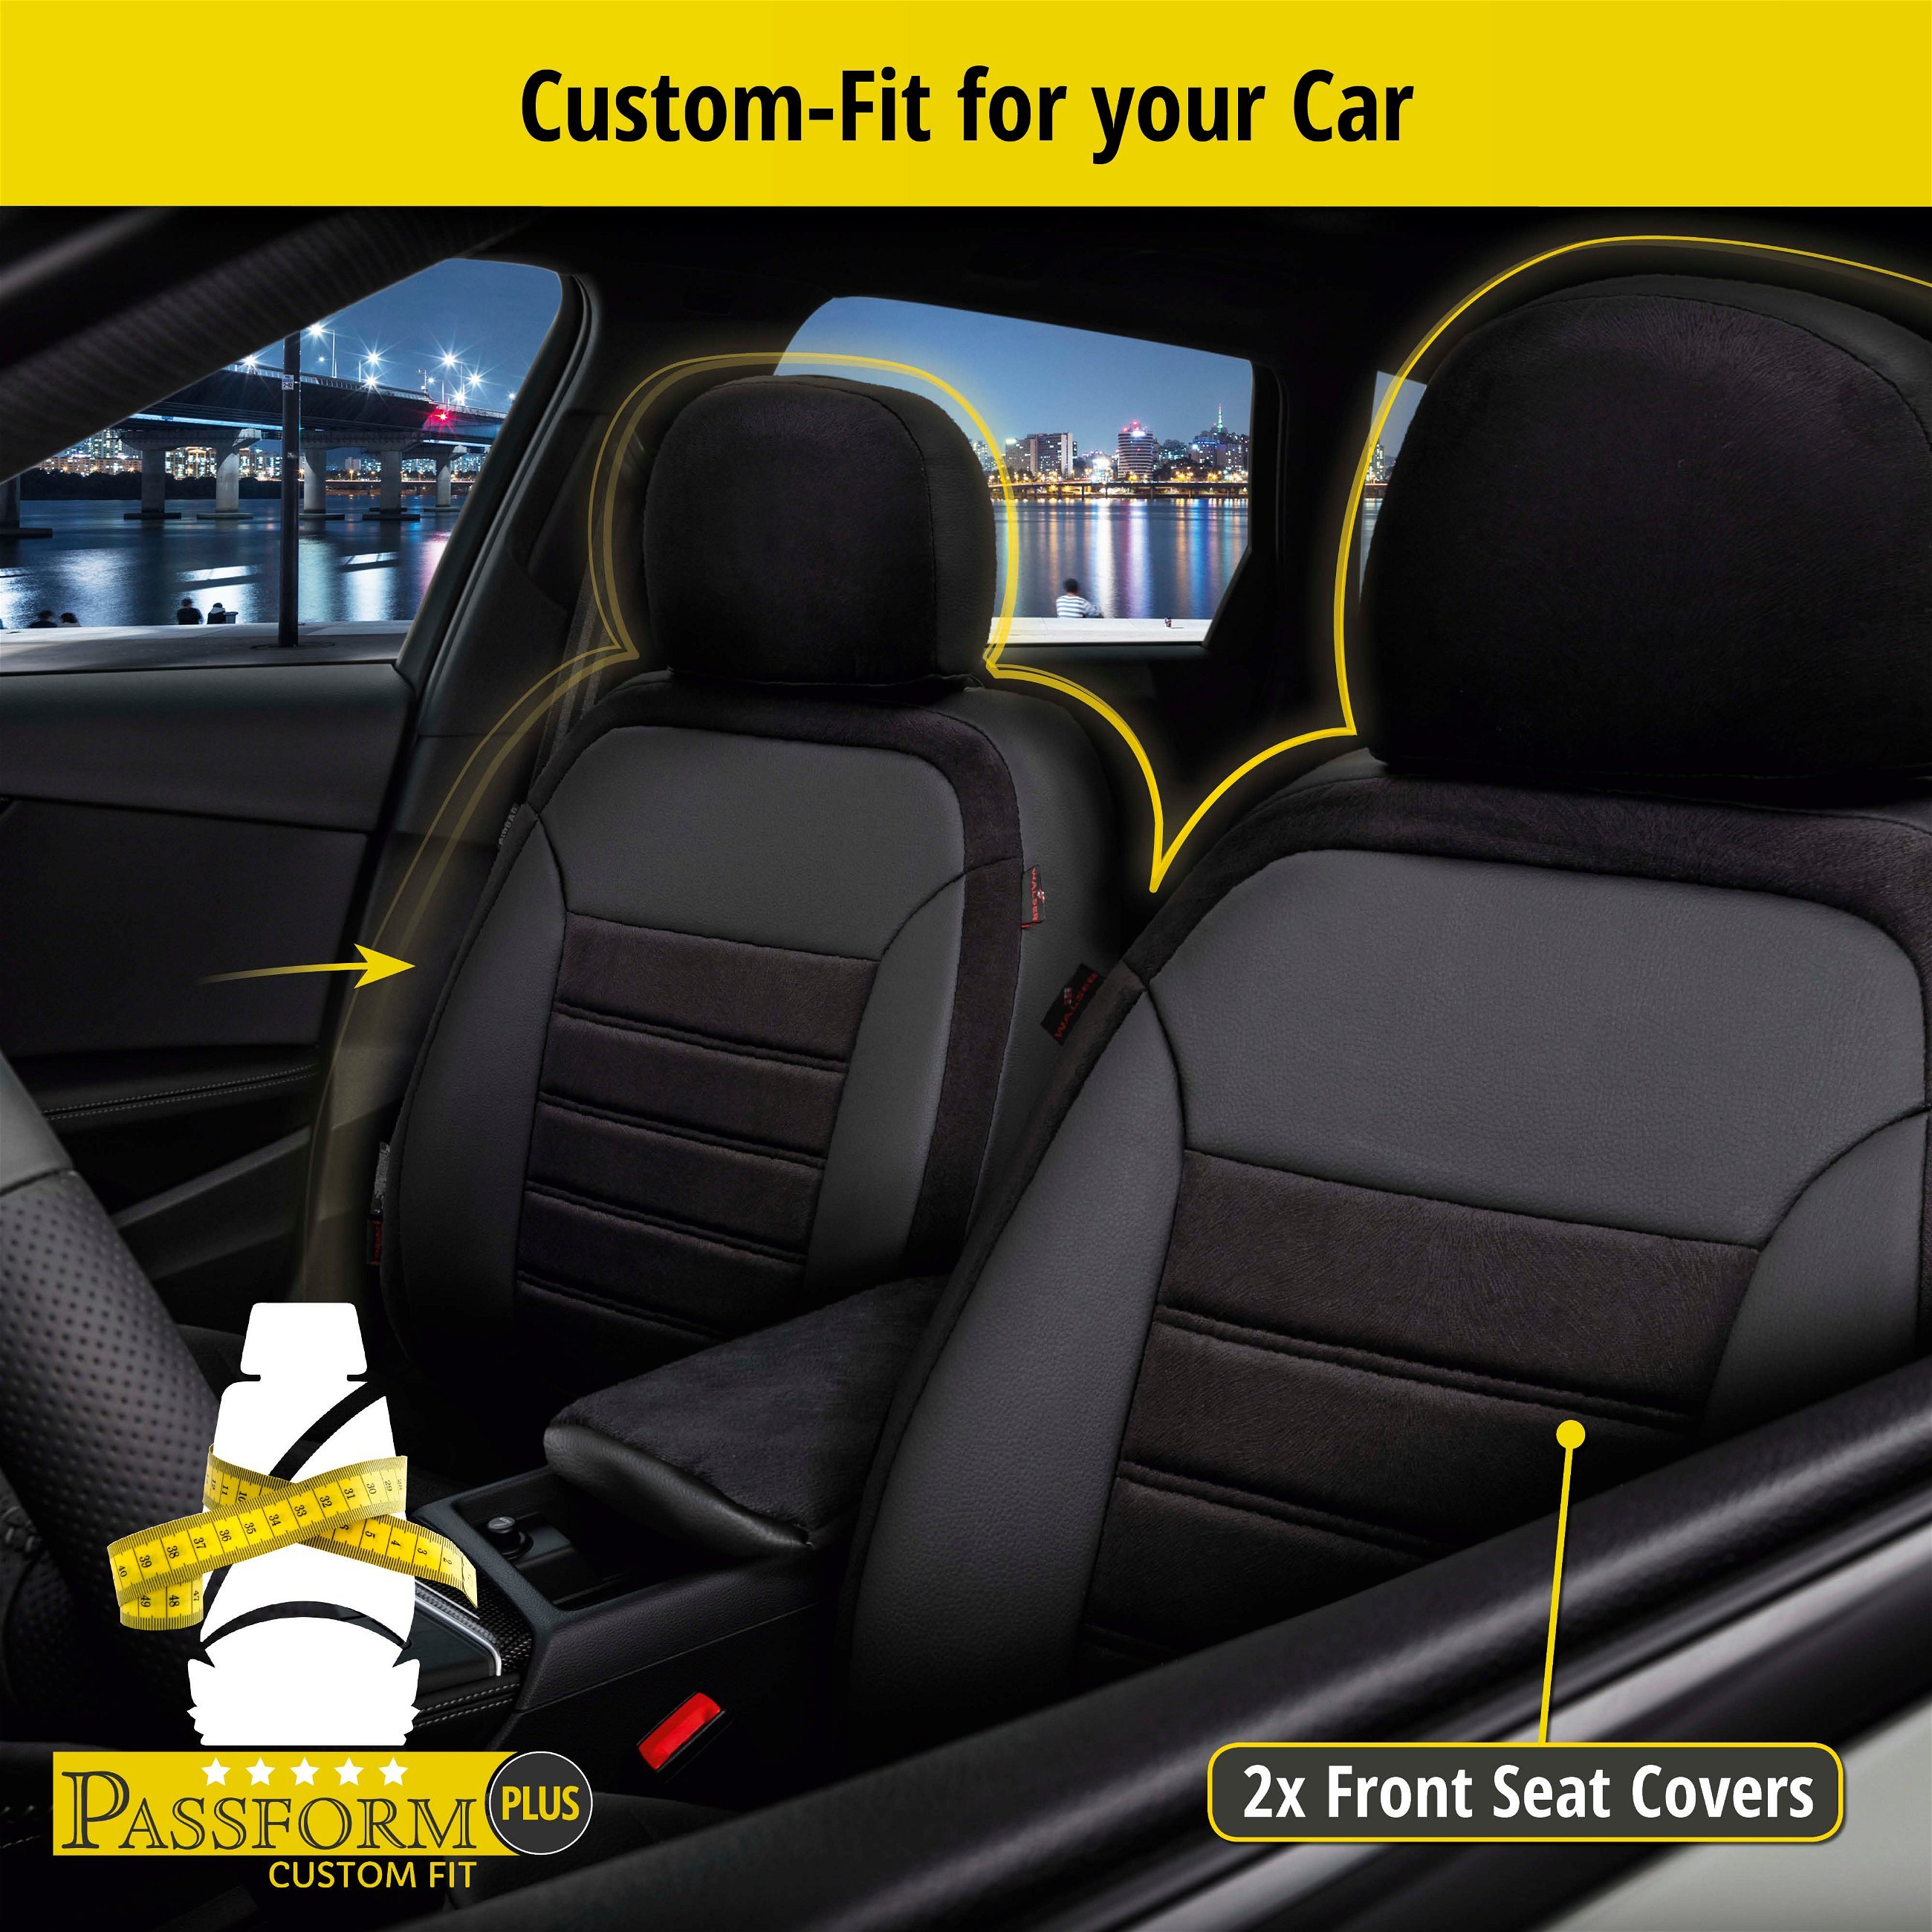 Seat Cover Bari for VW Tiguan (5N) 09/2007-07/2018, 2 seat covers for normal seats